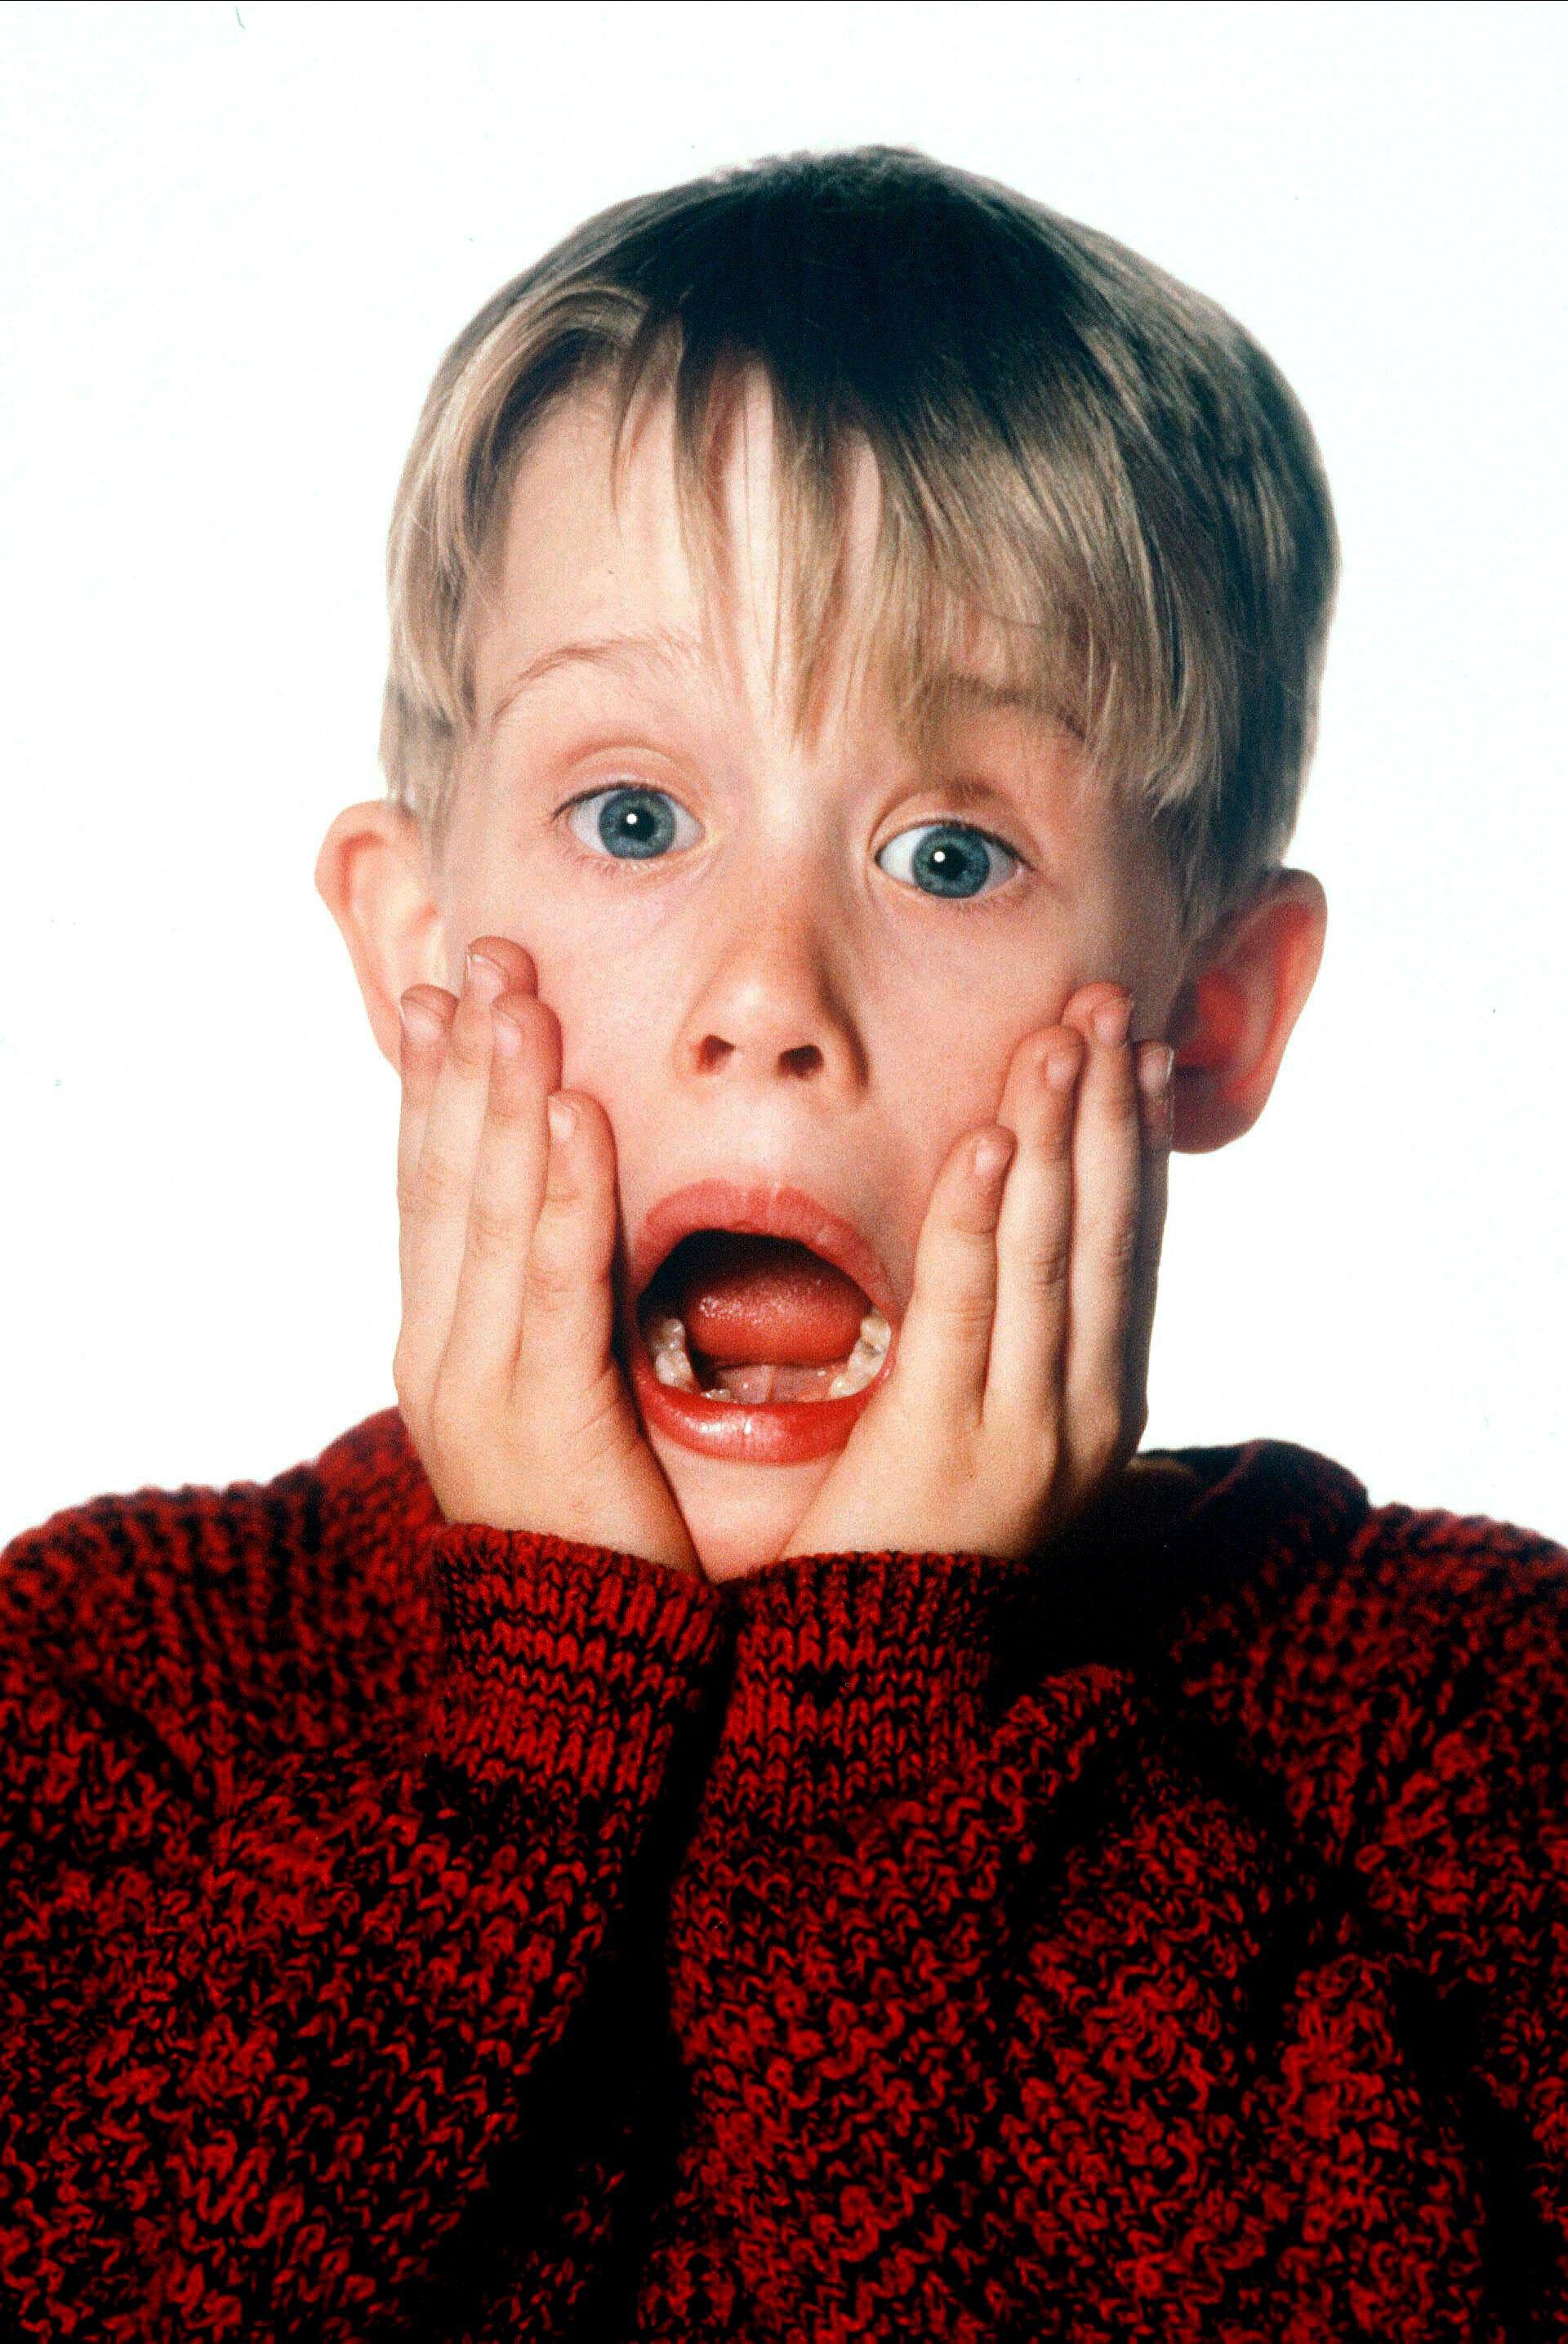 Home Alone - starring Macaulay Culkin - was a huge success when it was released in 1990